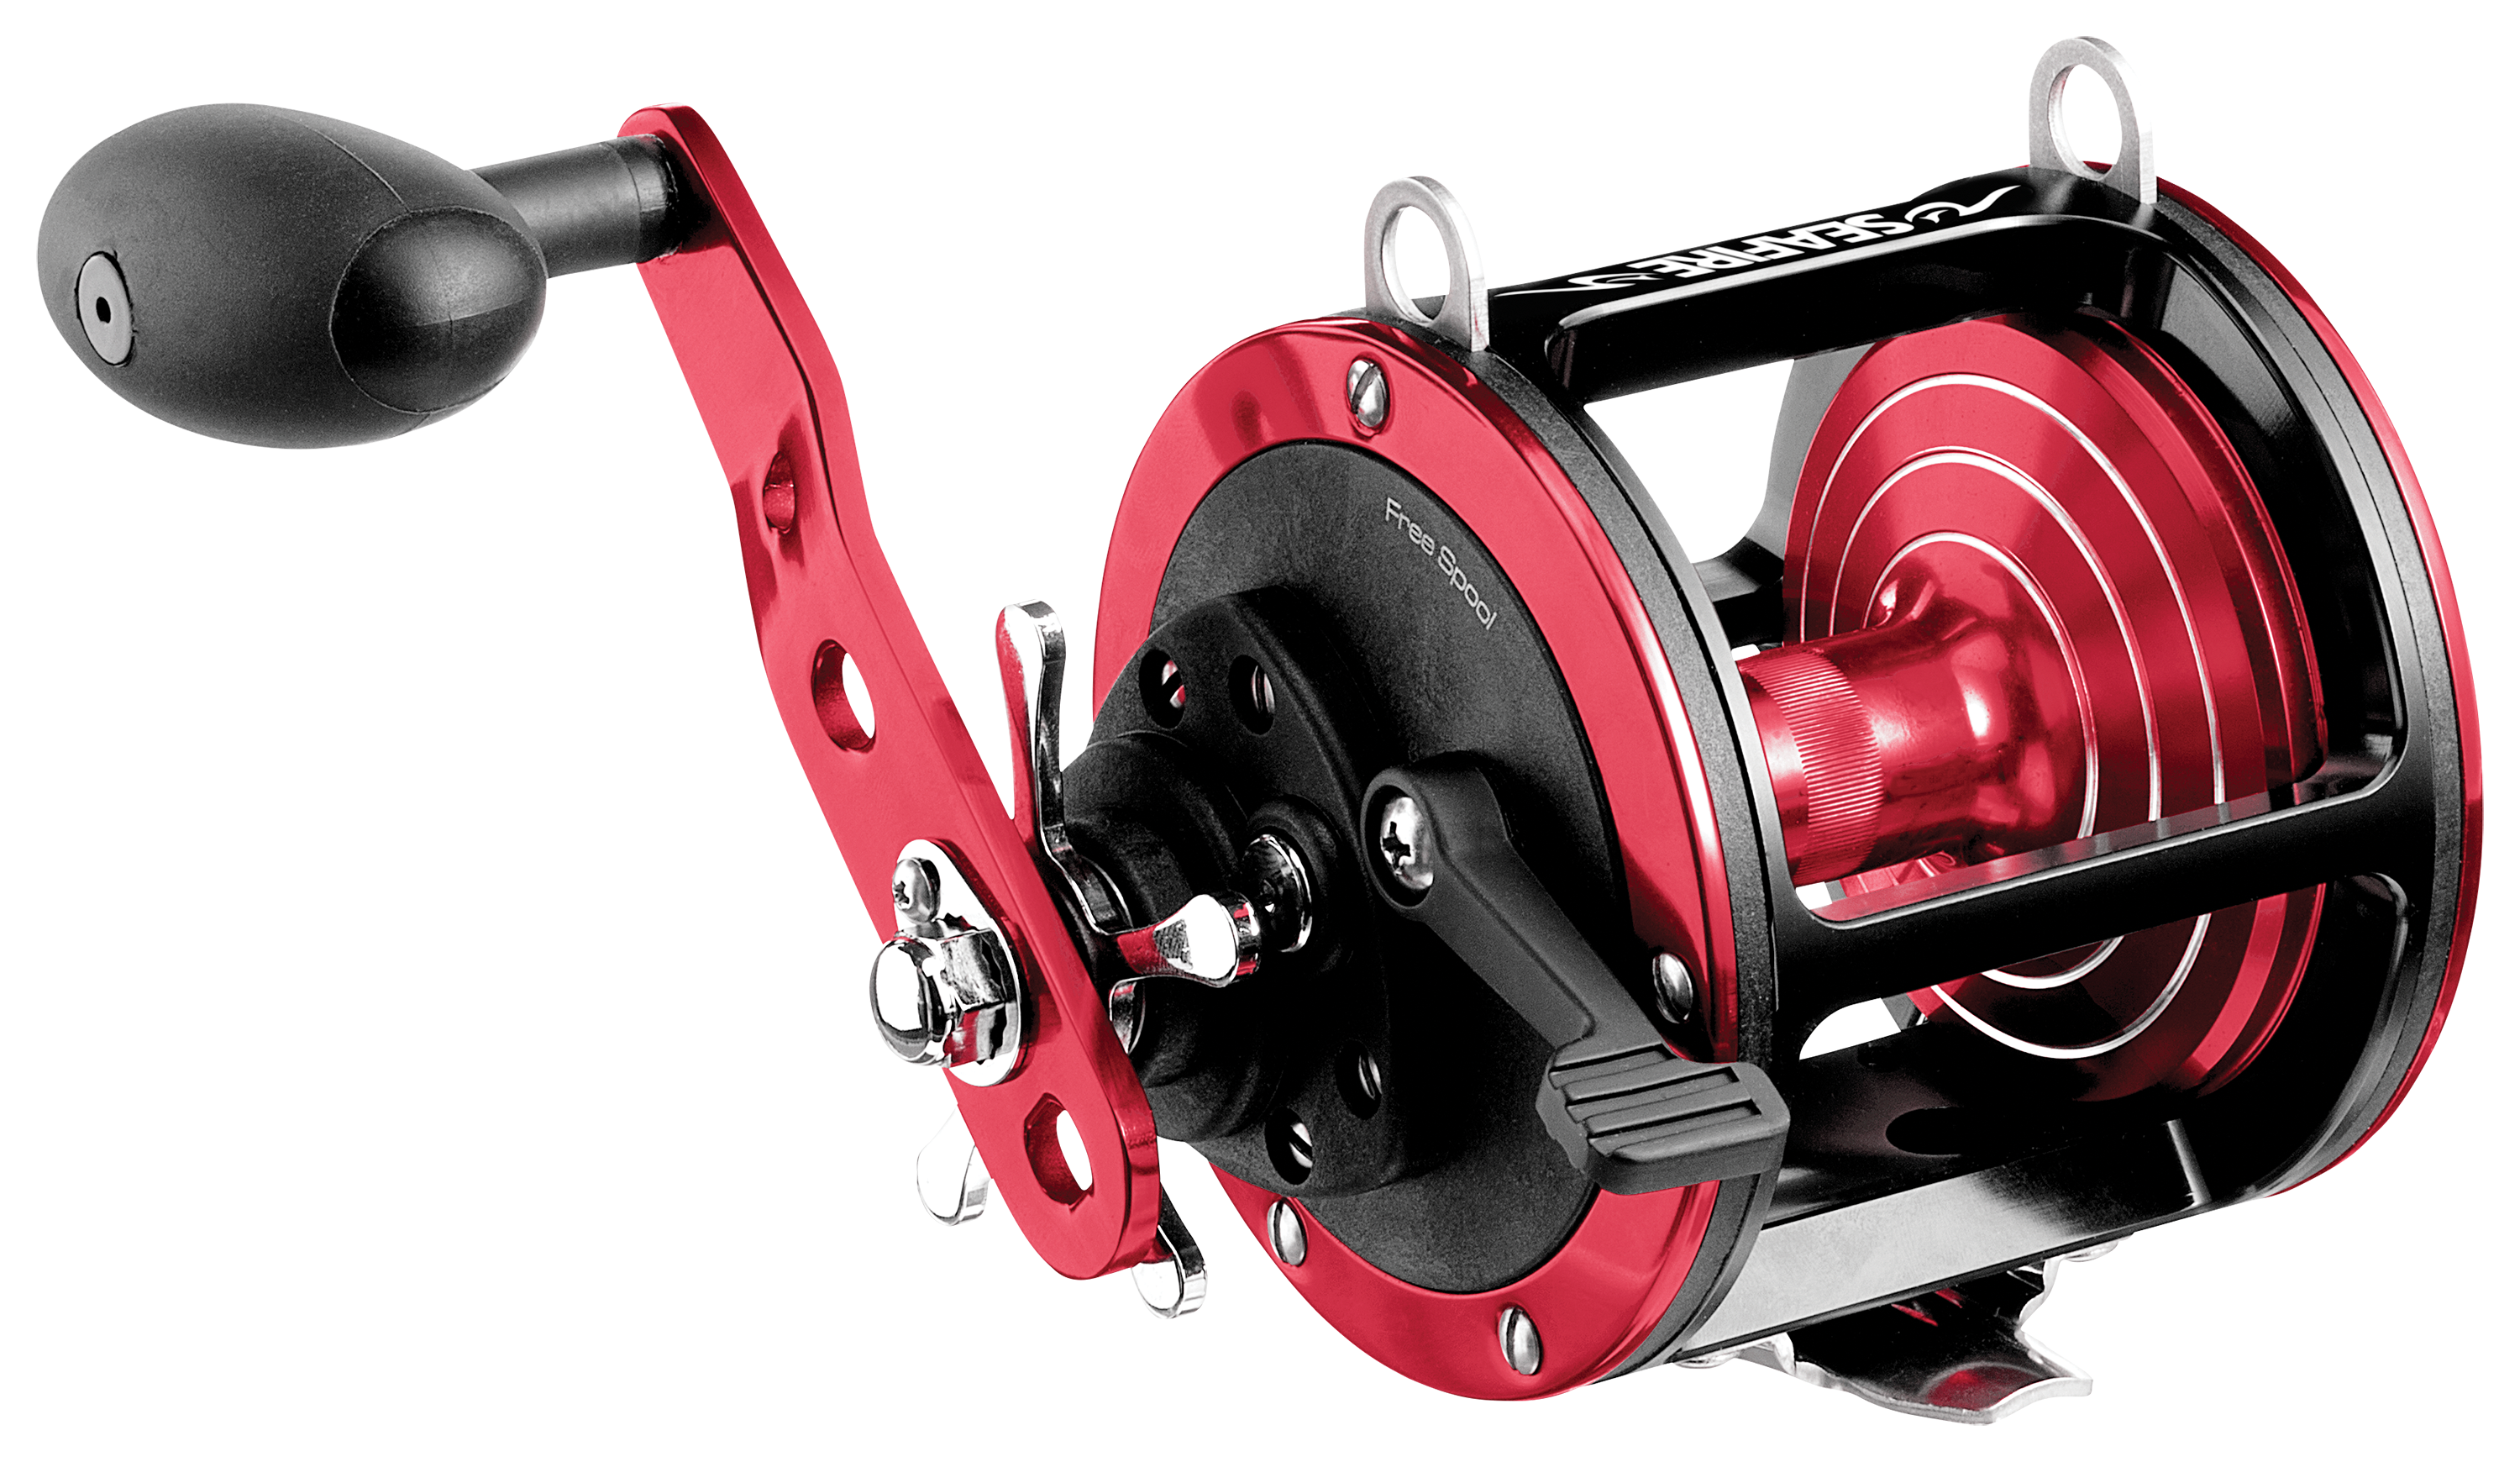 Offshore Angler SeaFire Conventional Saltwater Reel - Model SF6 0